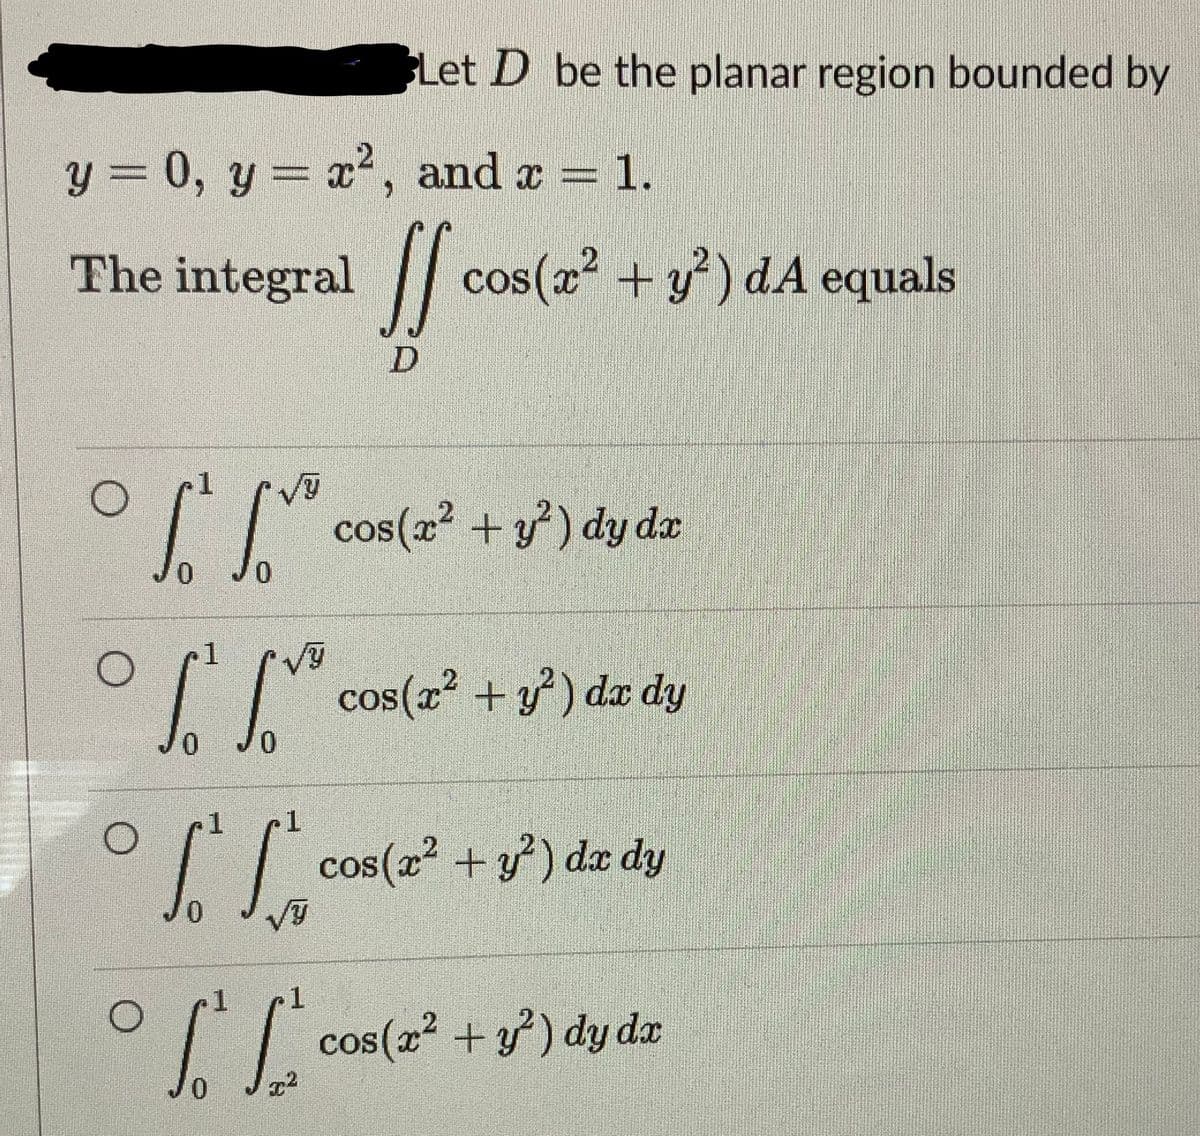 y = 0, y = x², and x = 1.
The integral
If cos
O
O
S
0 JO
1
T L
0 0
√Y
Let D be the planar region bounded by
1
1
To fo
0
1
TE
0
x²
cos(x² + y²) dA equals
cos(x² + y²) dy dx
cos(x² + y²) dx dy
cos(x² + y²) dx dy
cos(x² + y²) dy dx